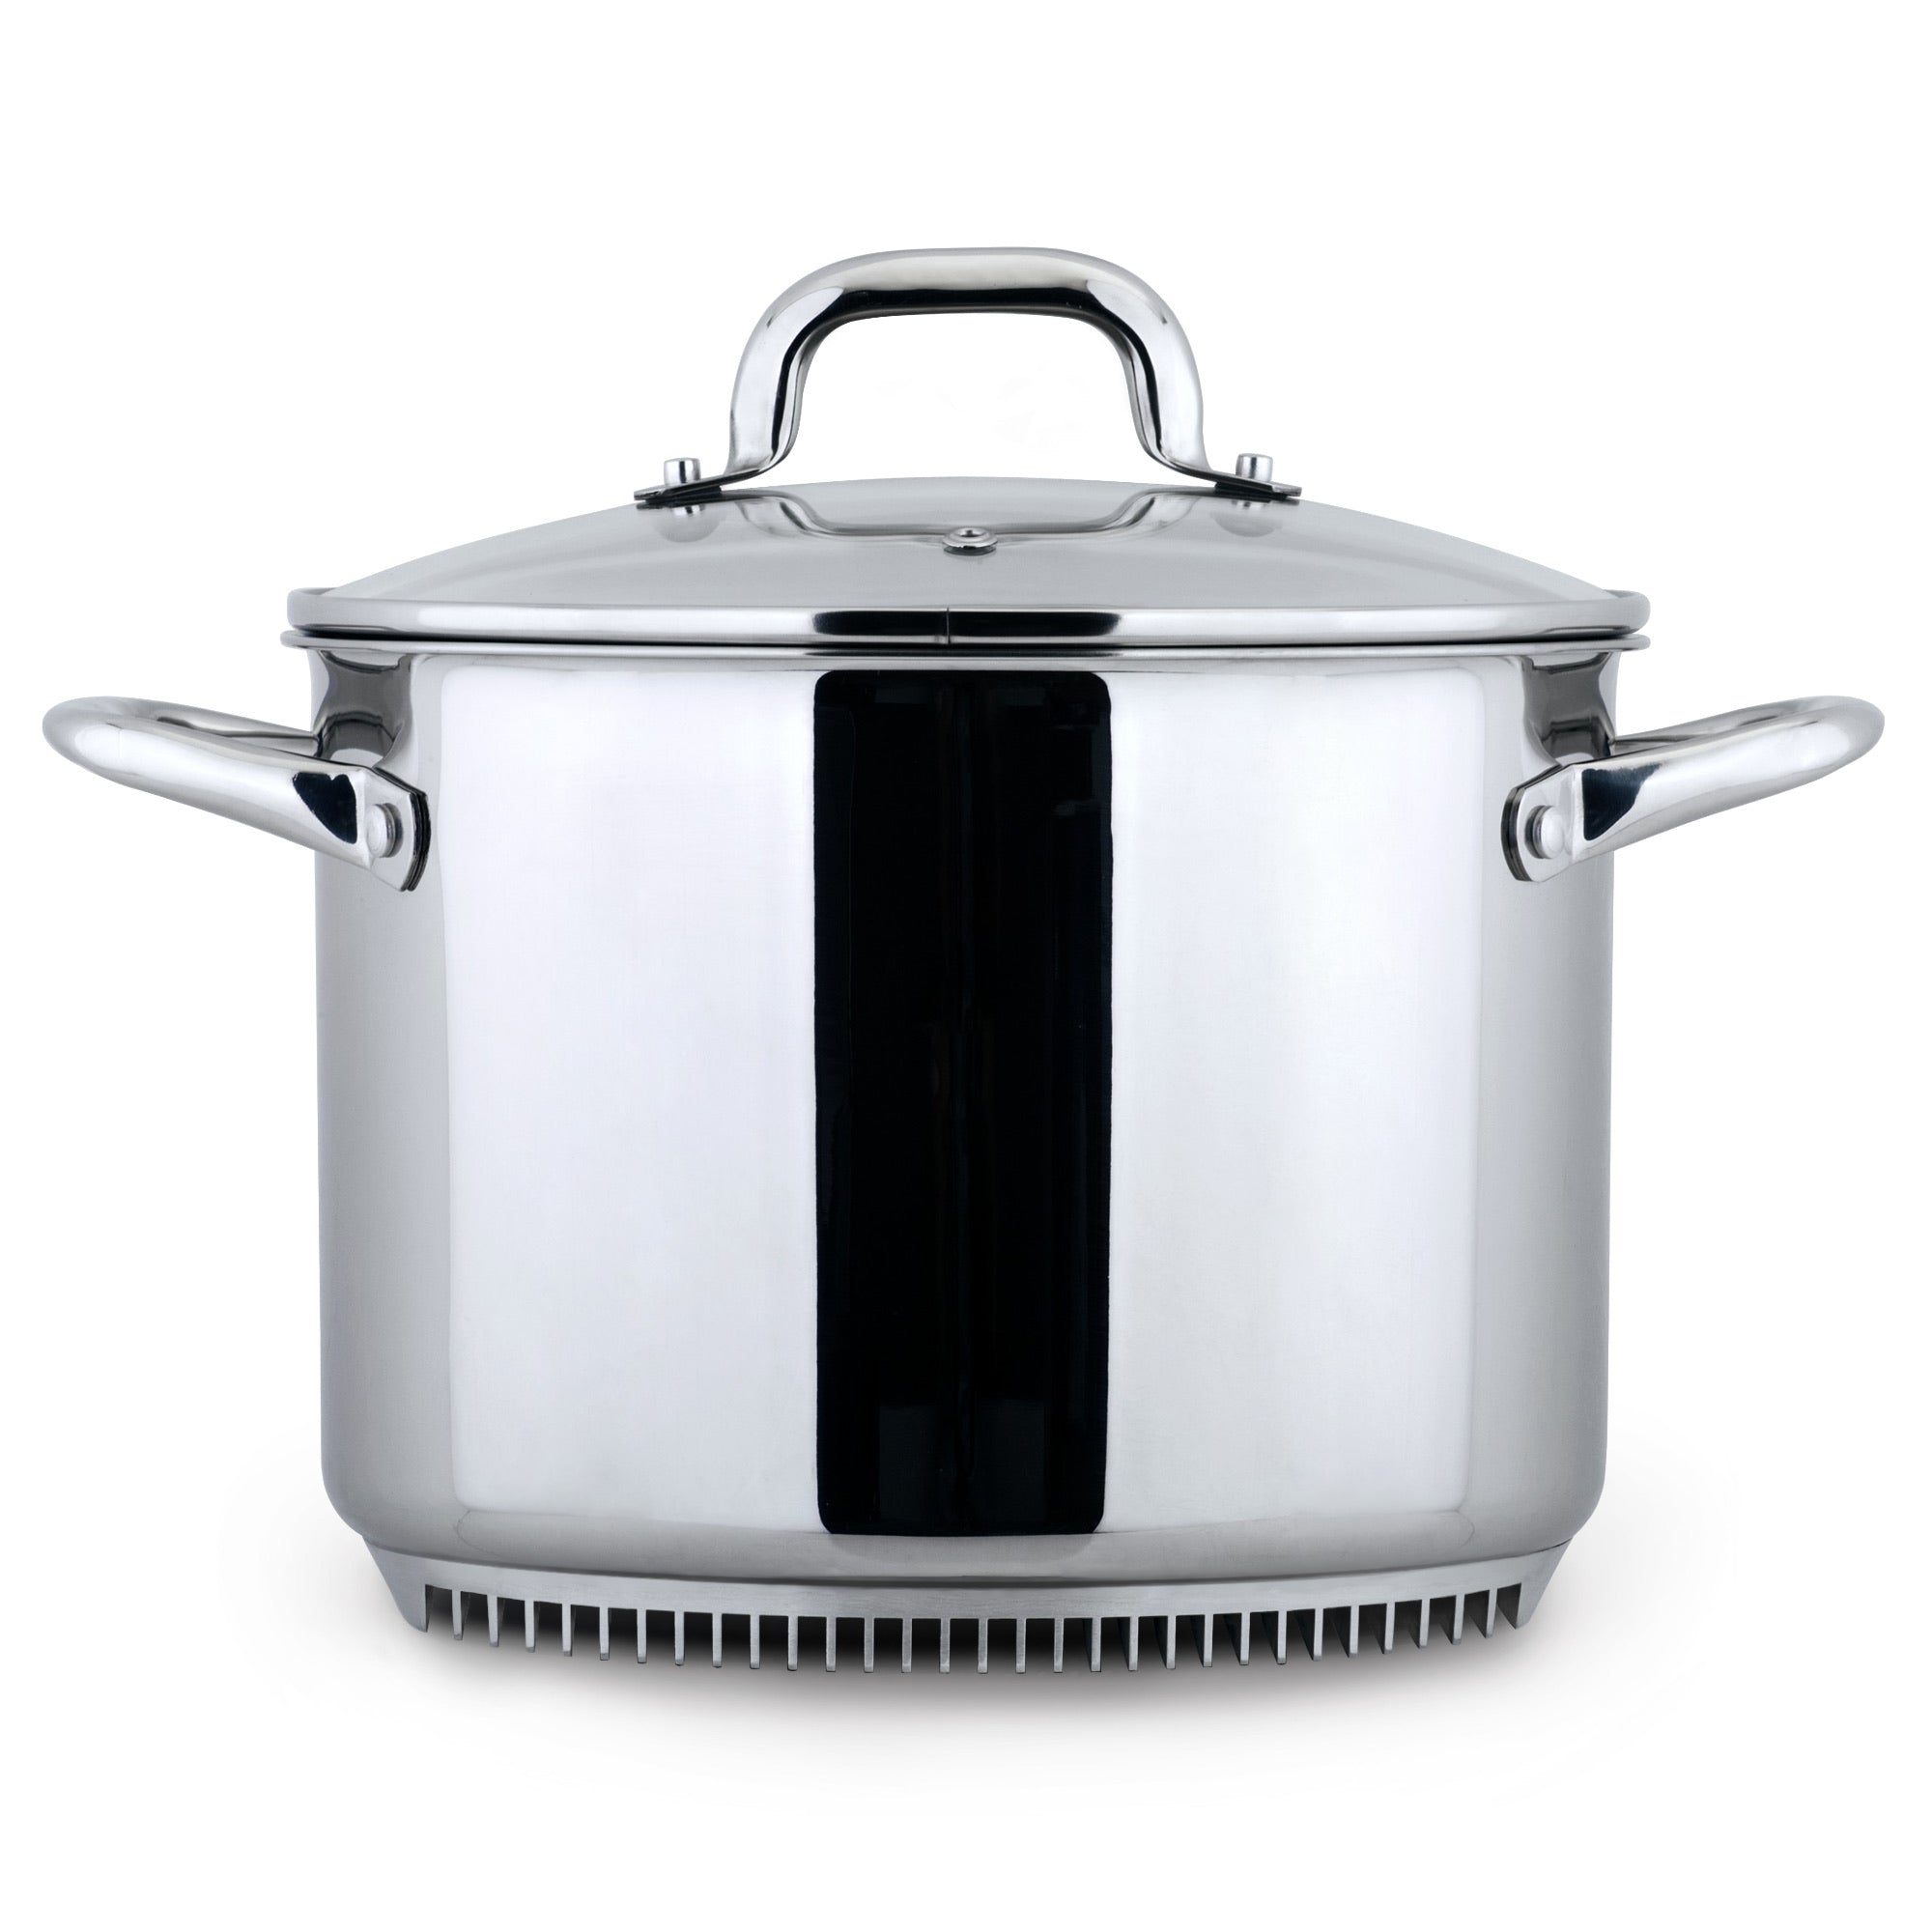 8 Qt. Stainless Steel Slow Cooker